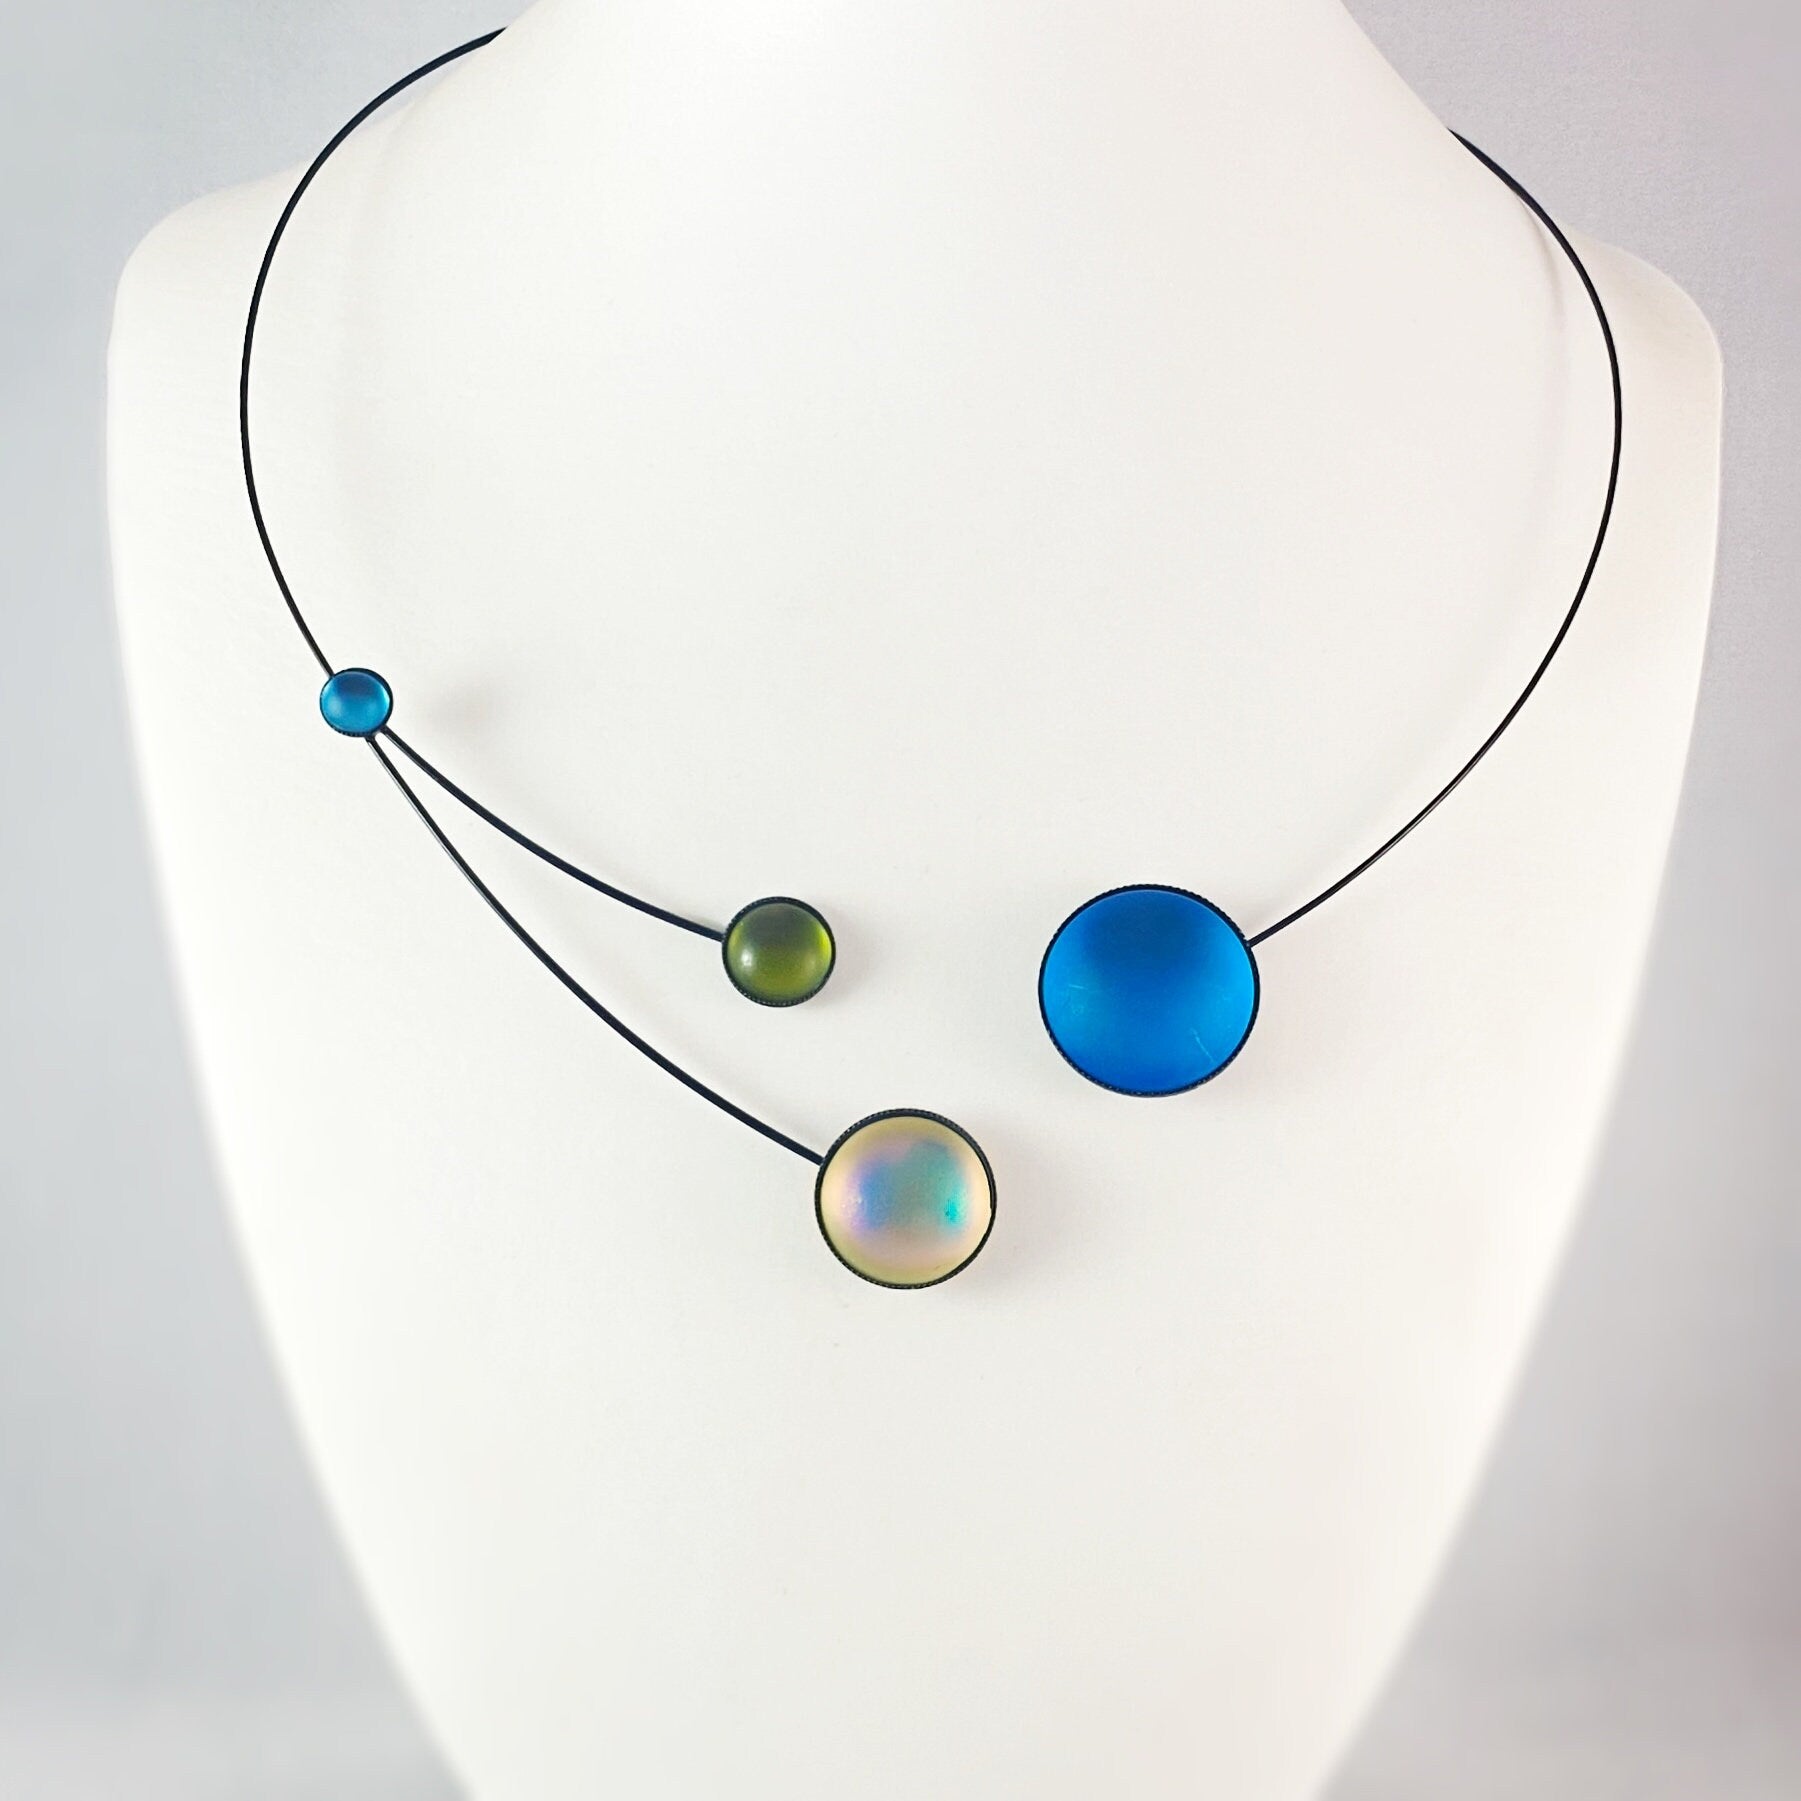 Black Memory Wire Floral Circle Necklace with Handmade Glass Beads, Hypoallergenic, Blue/Olive - Kristina